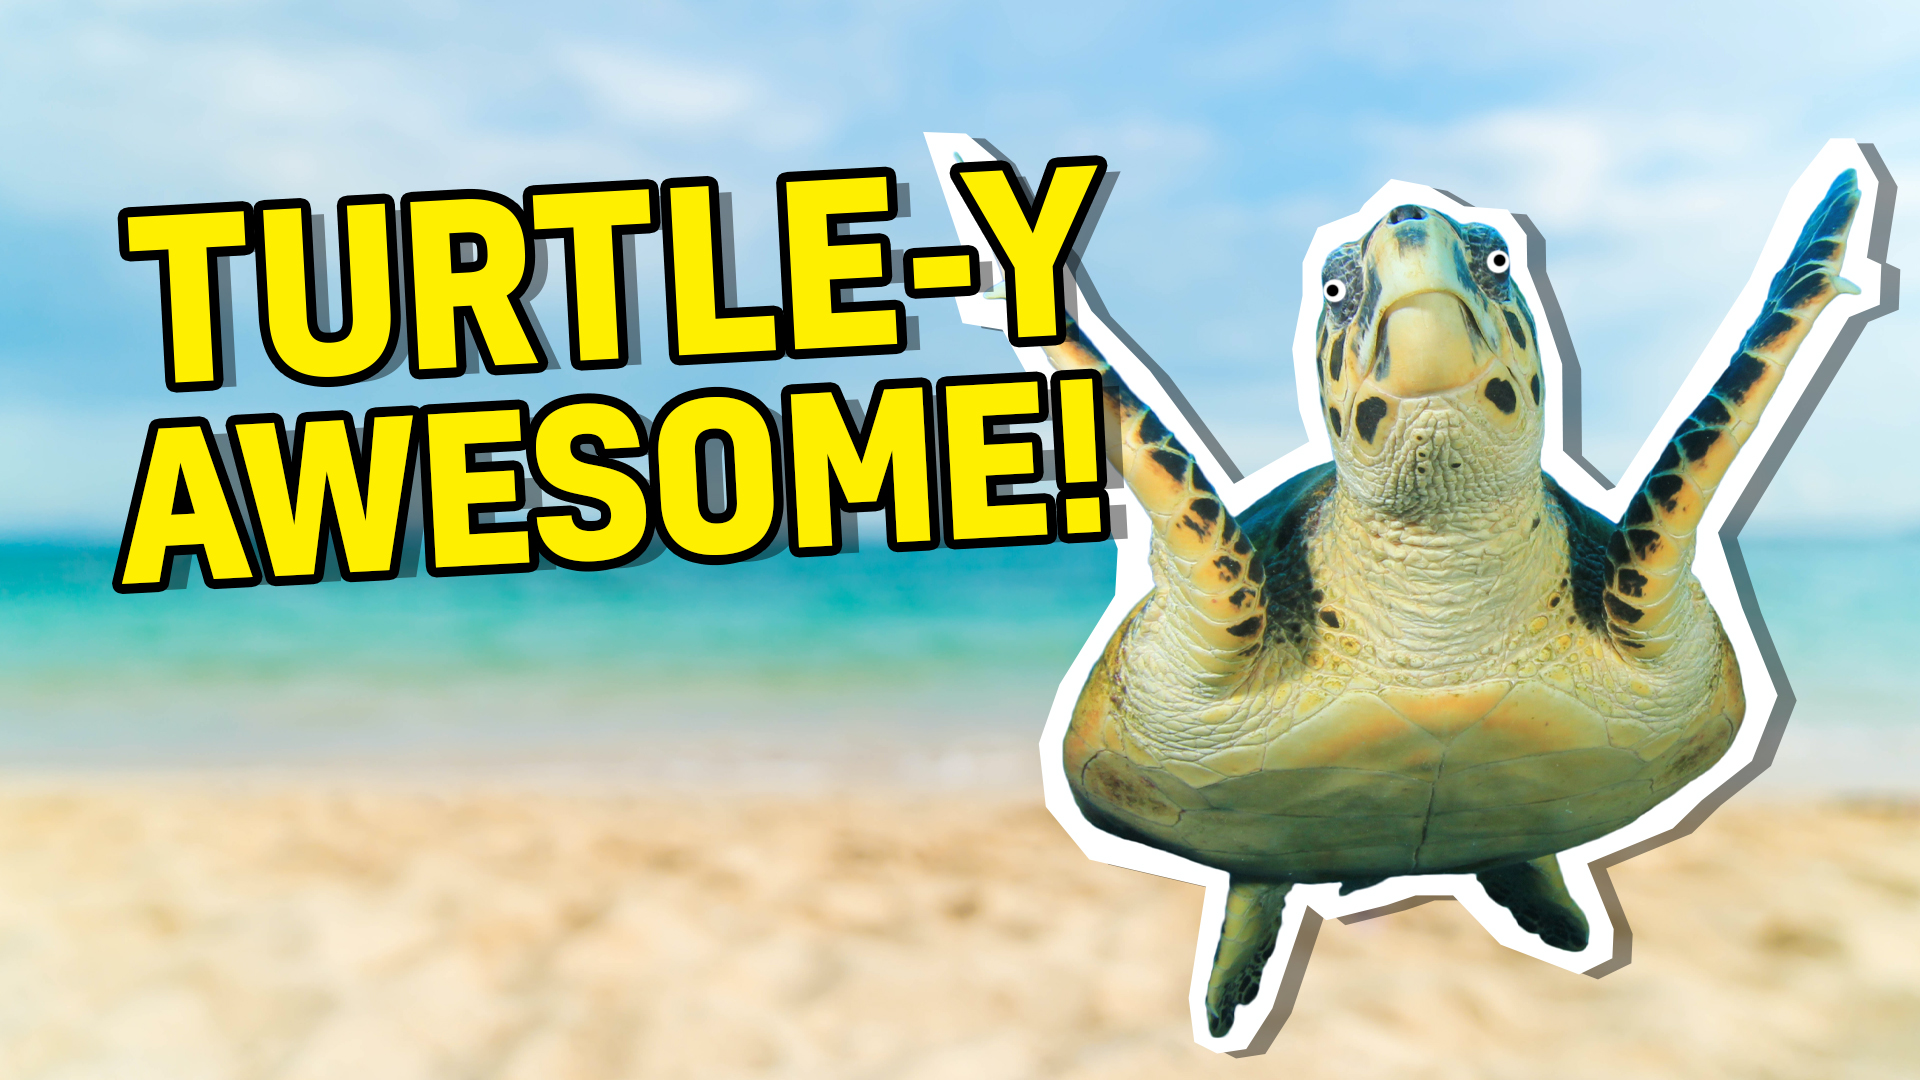 Turtle-y awesome